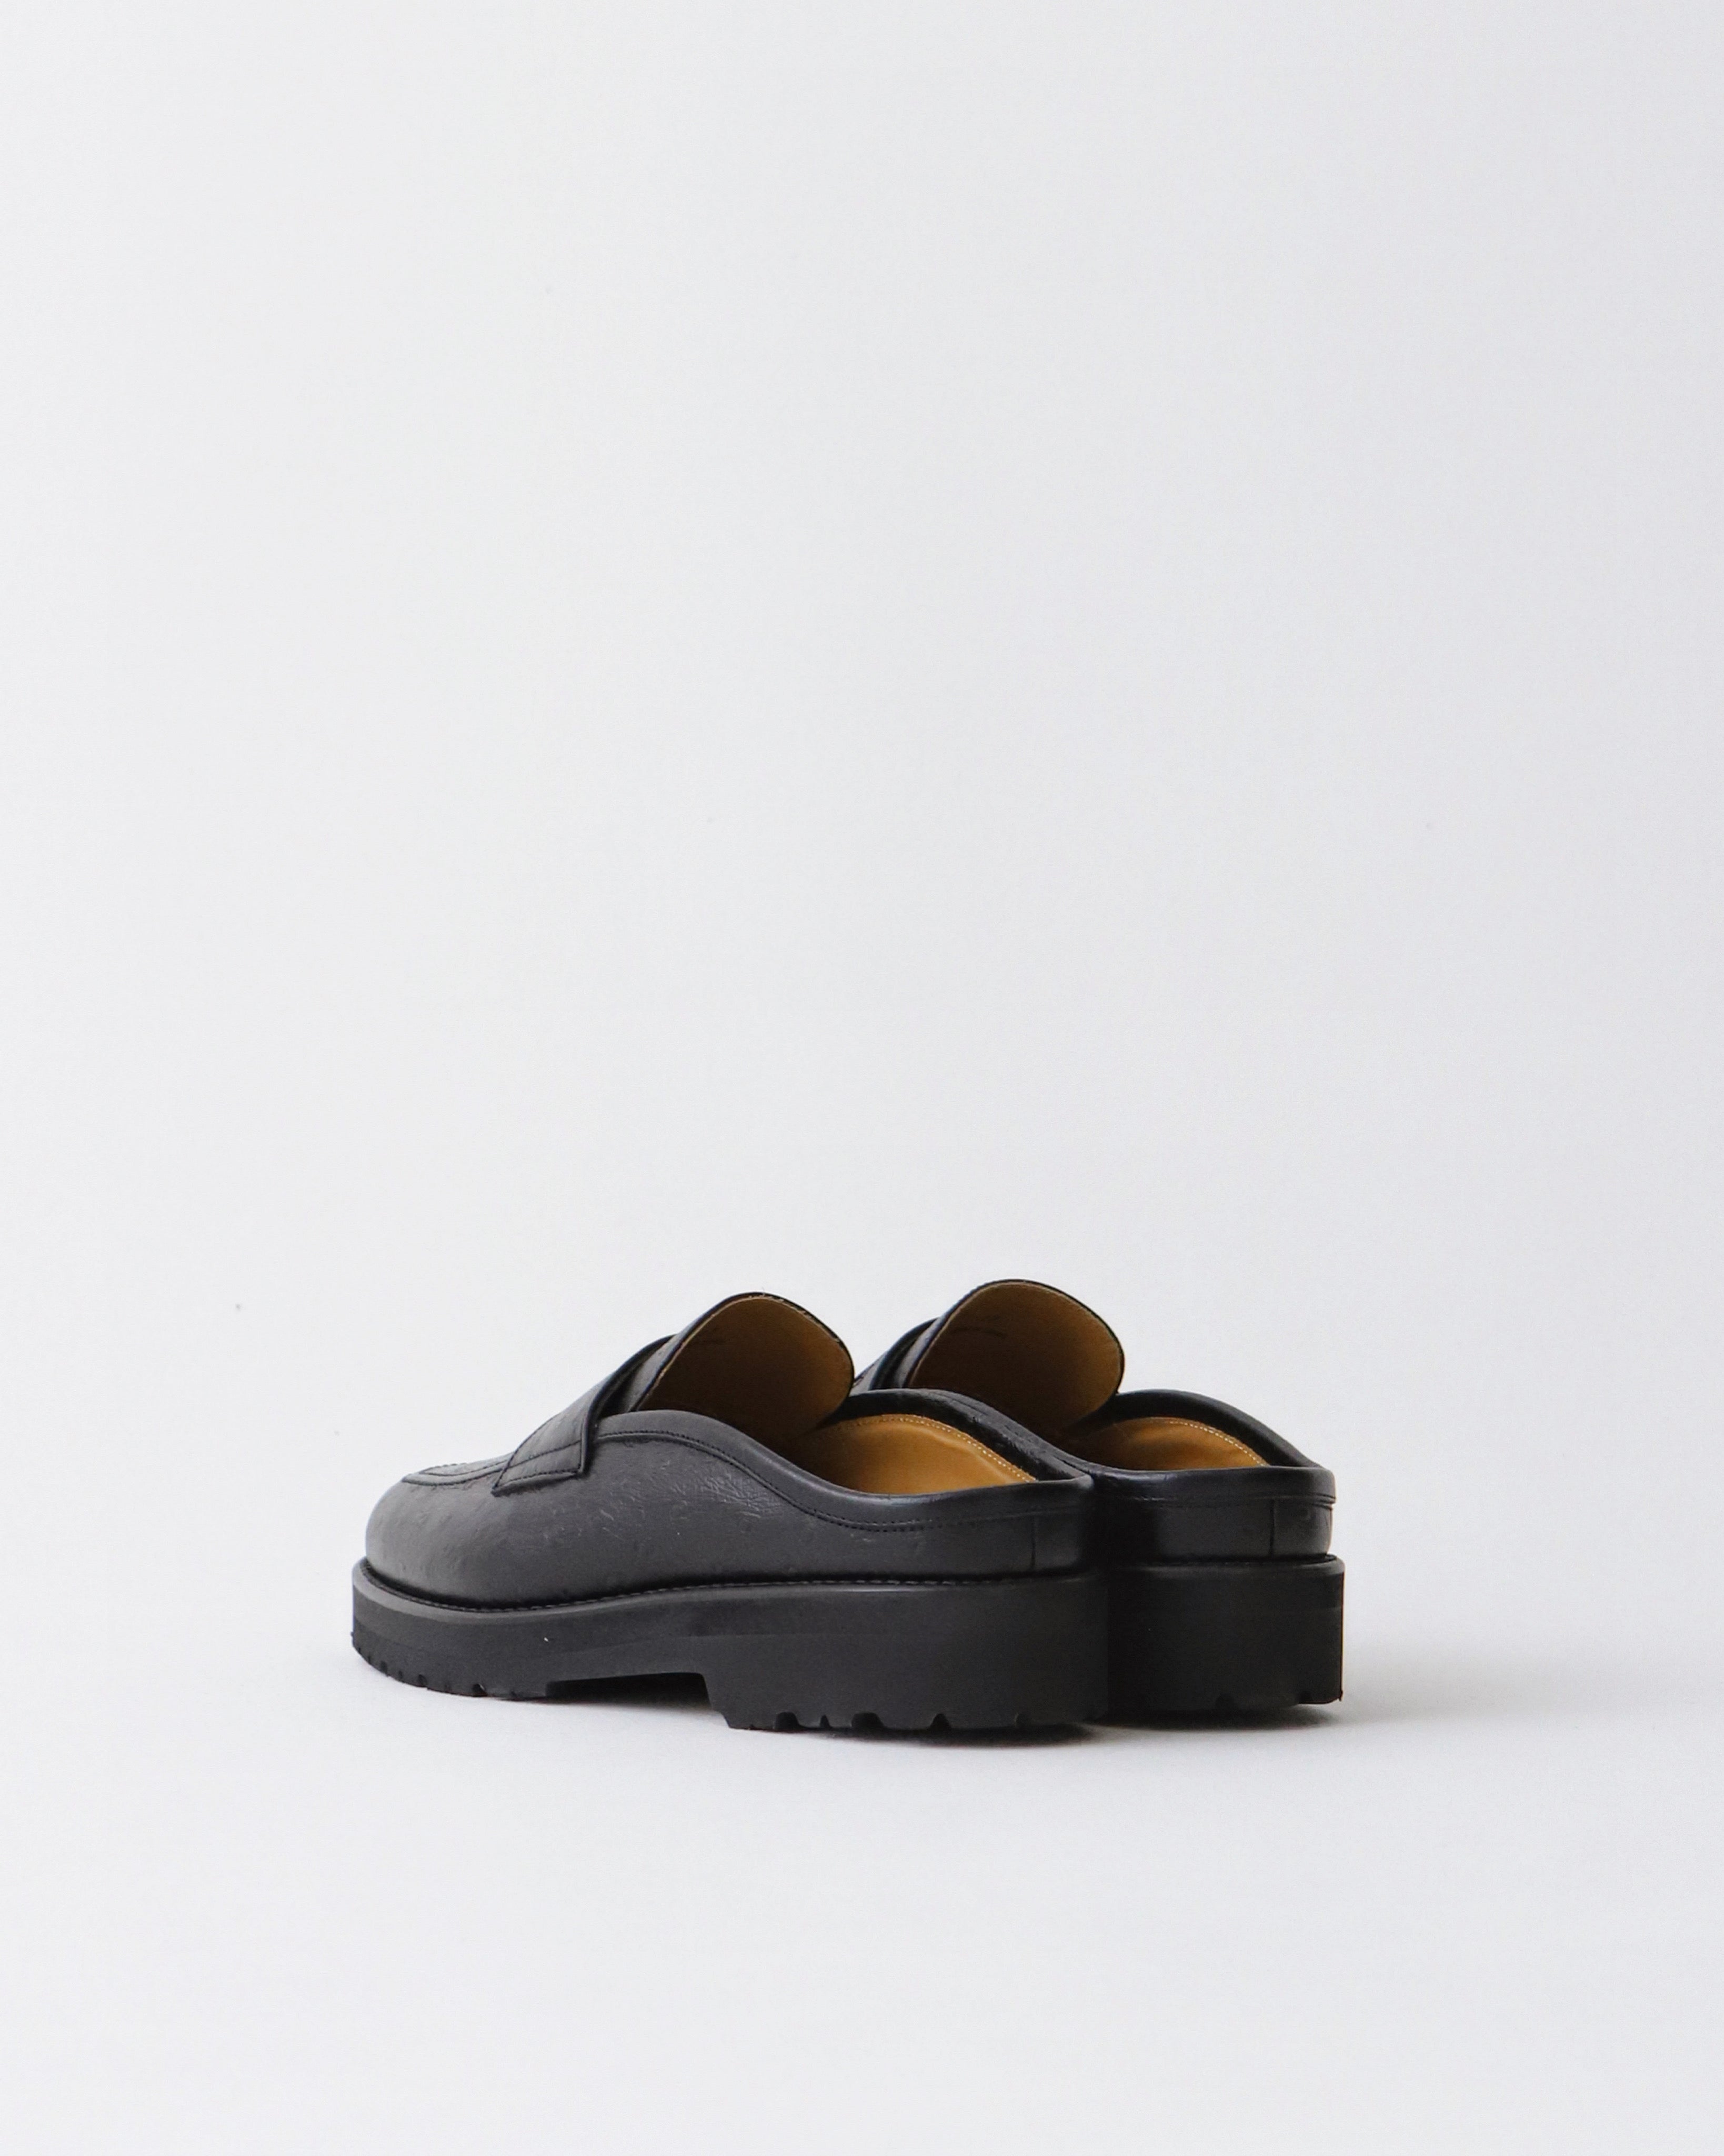 COIN LOAFER MULE OSTRICH BLACK